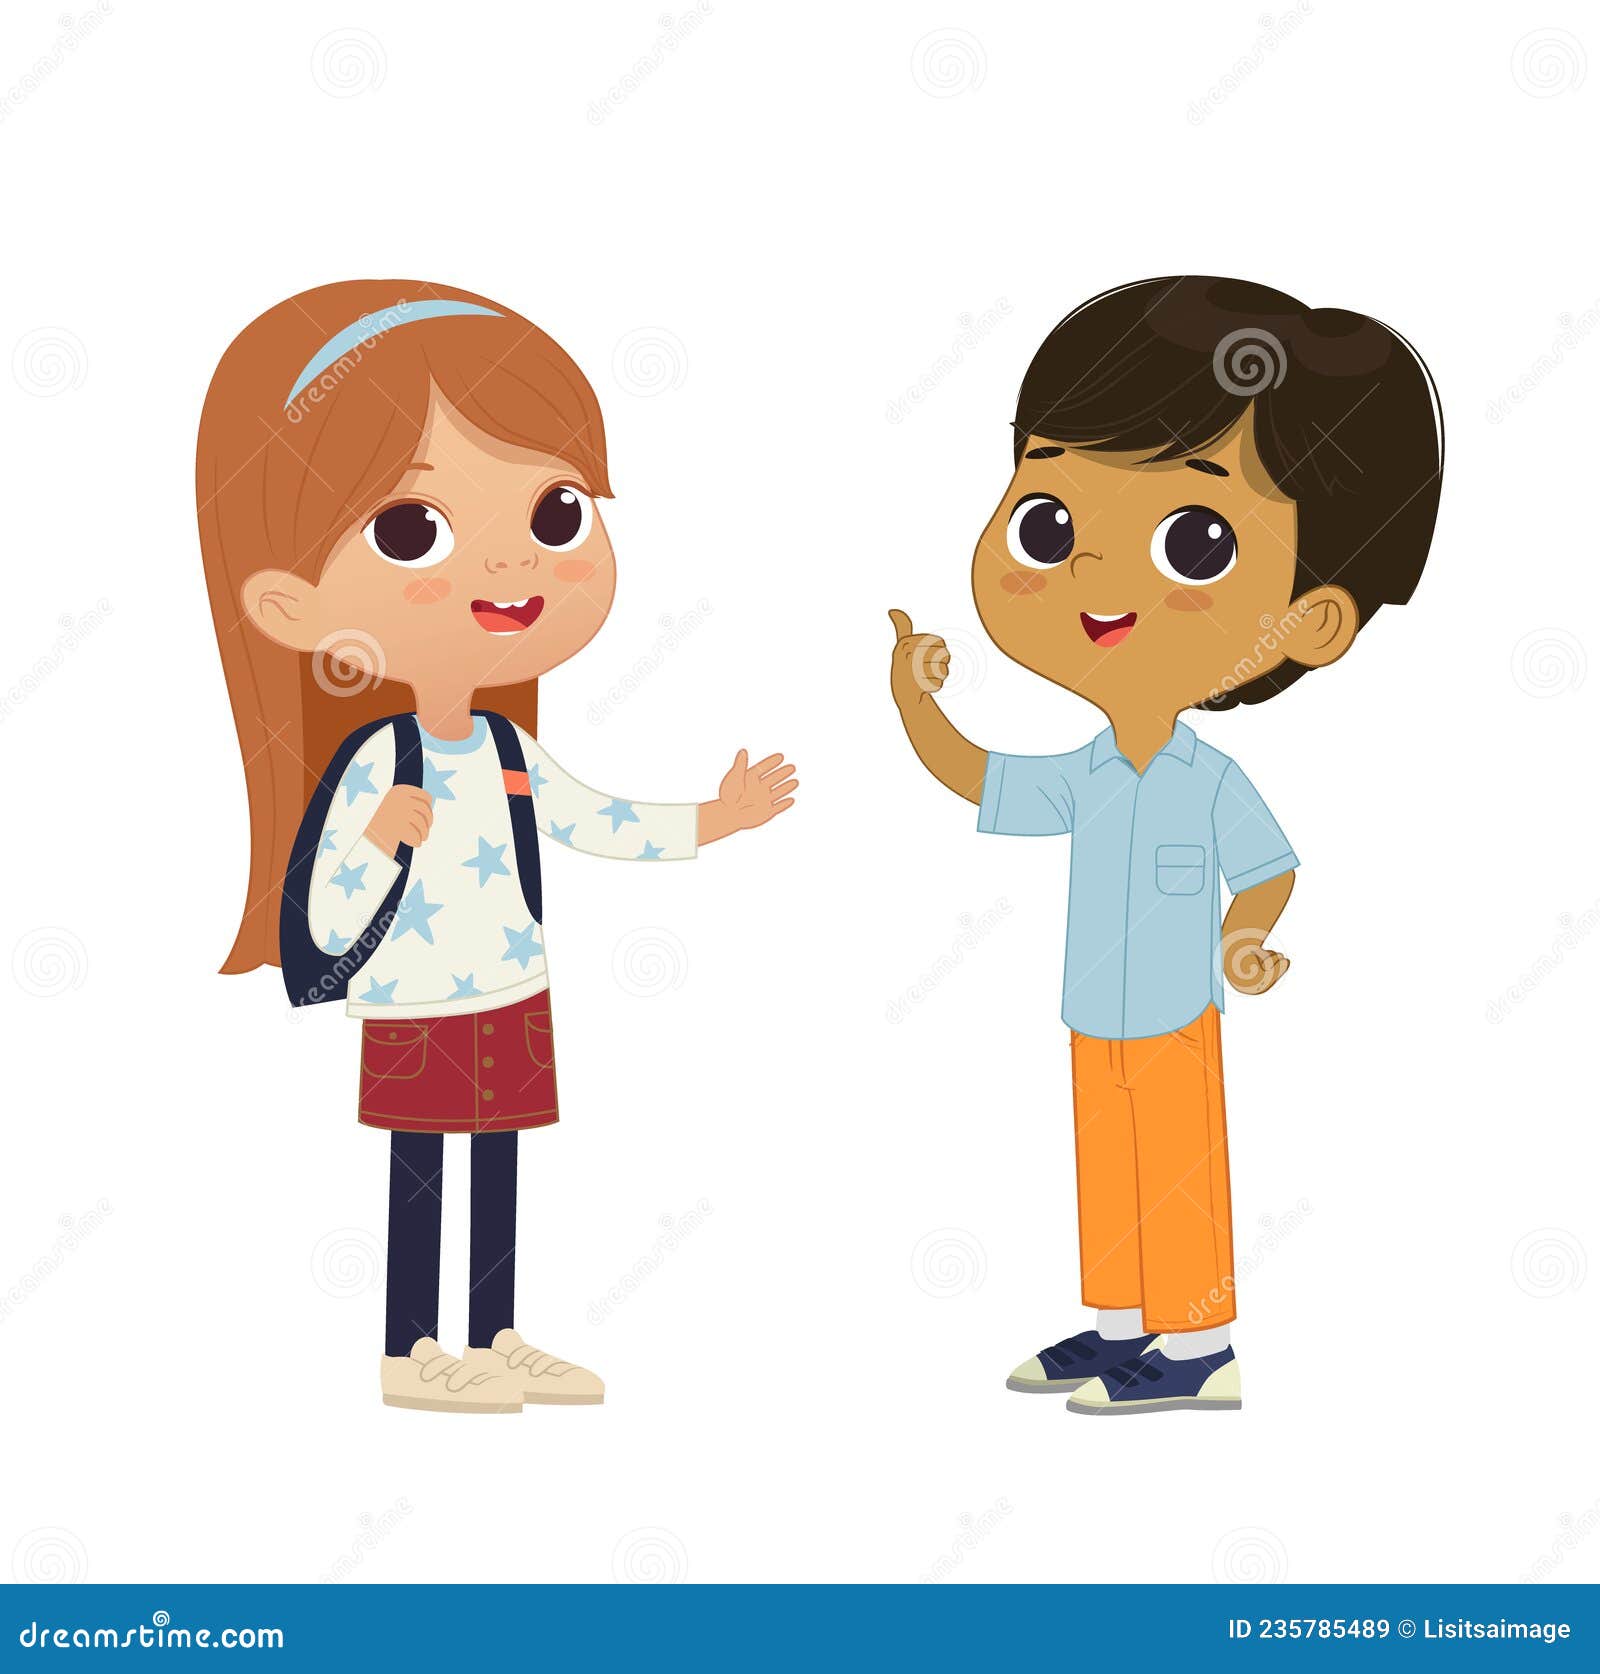 Cartoon Vector Illustration of the Smiling Cute Boy and Girl Pointing ...